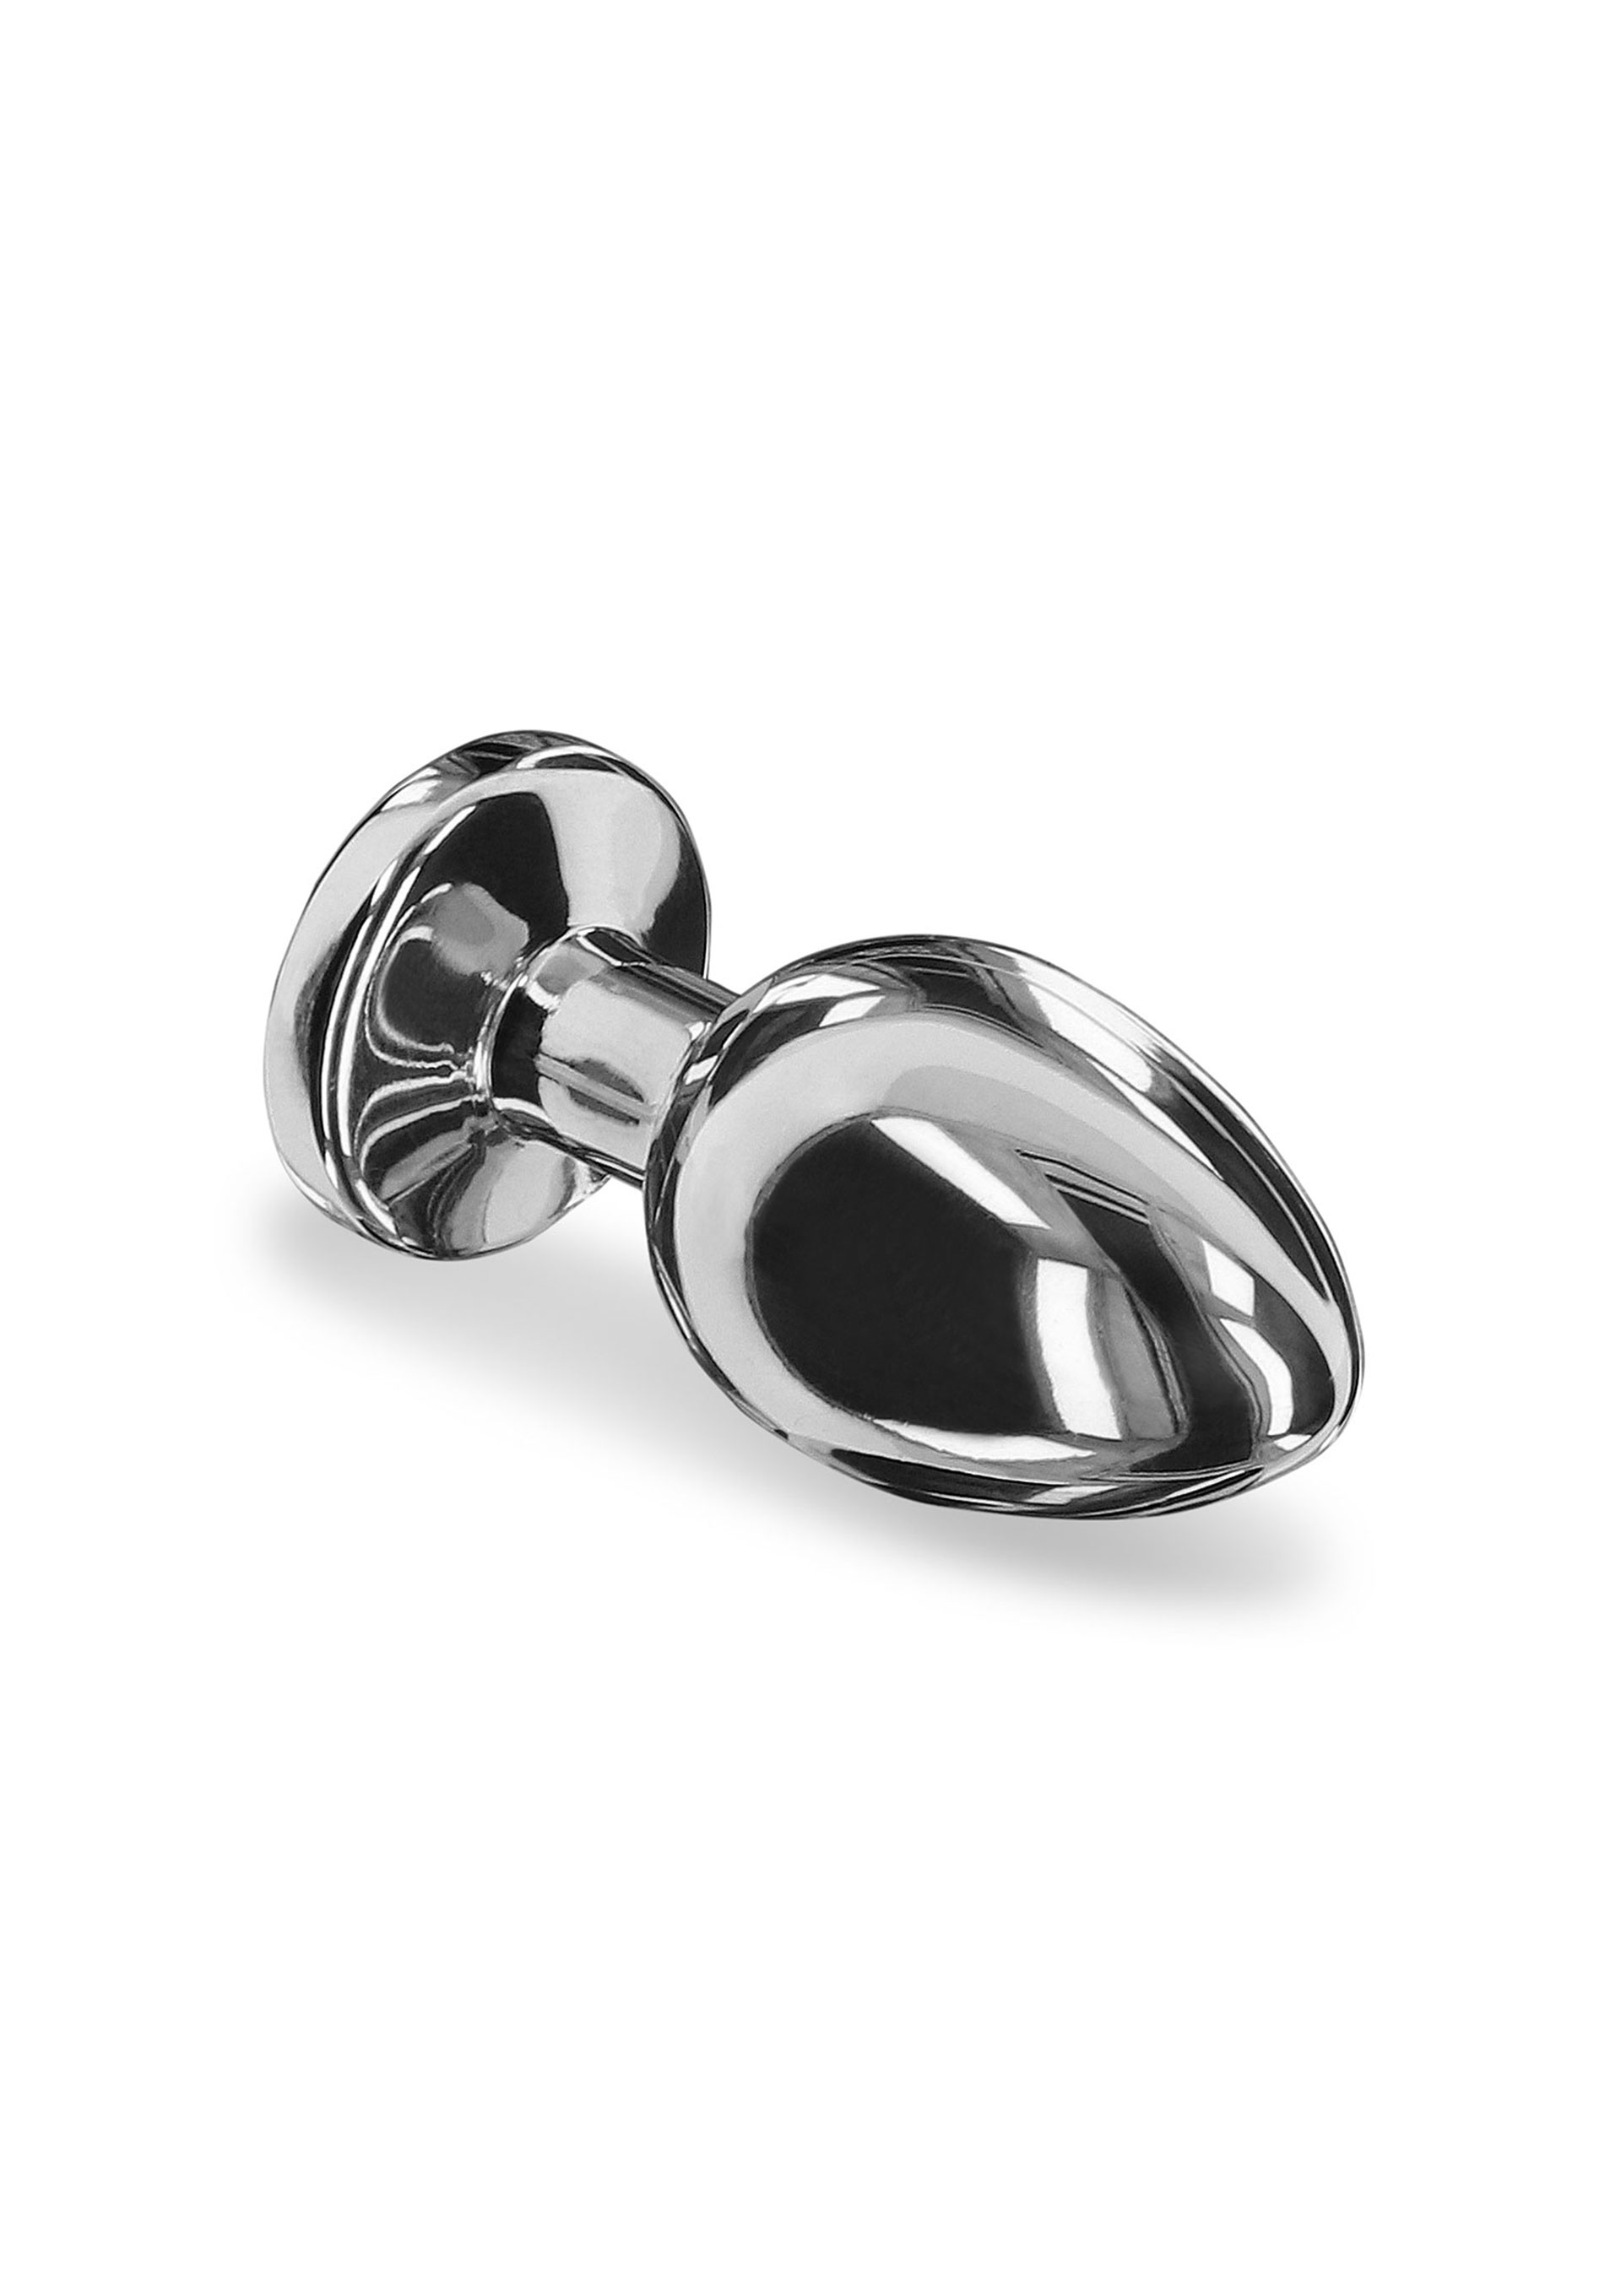 Playhouse - Weighted Steel Butt Plug - S